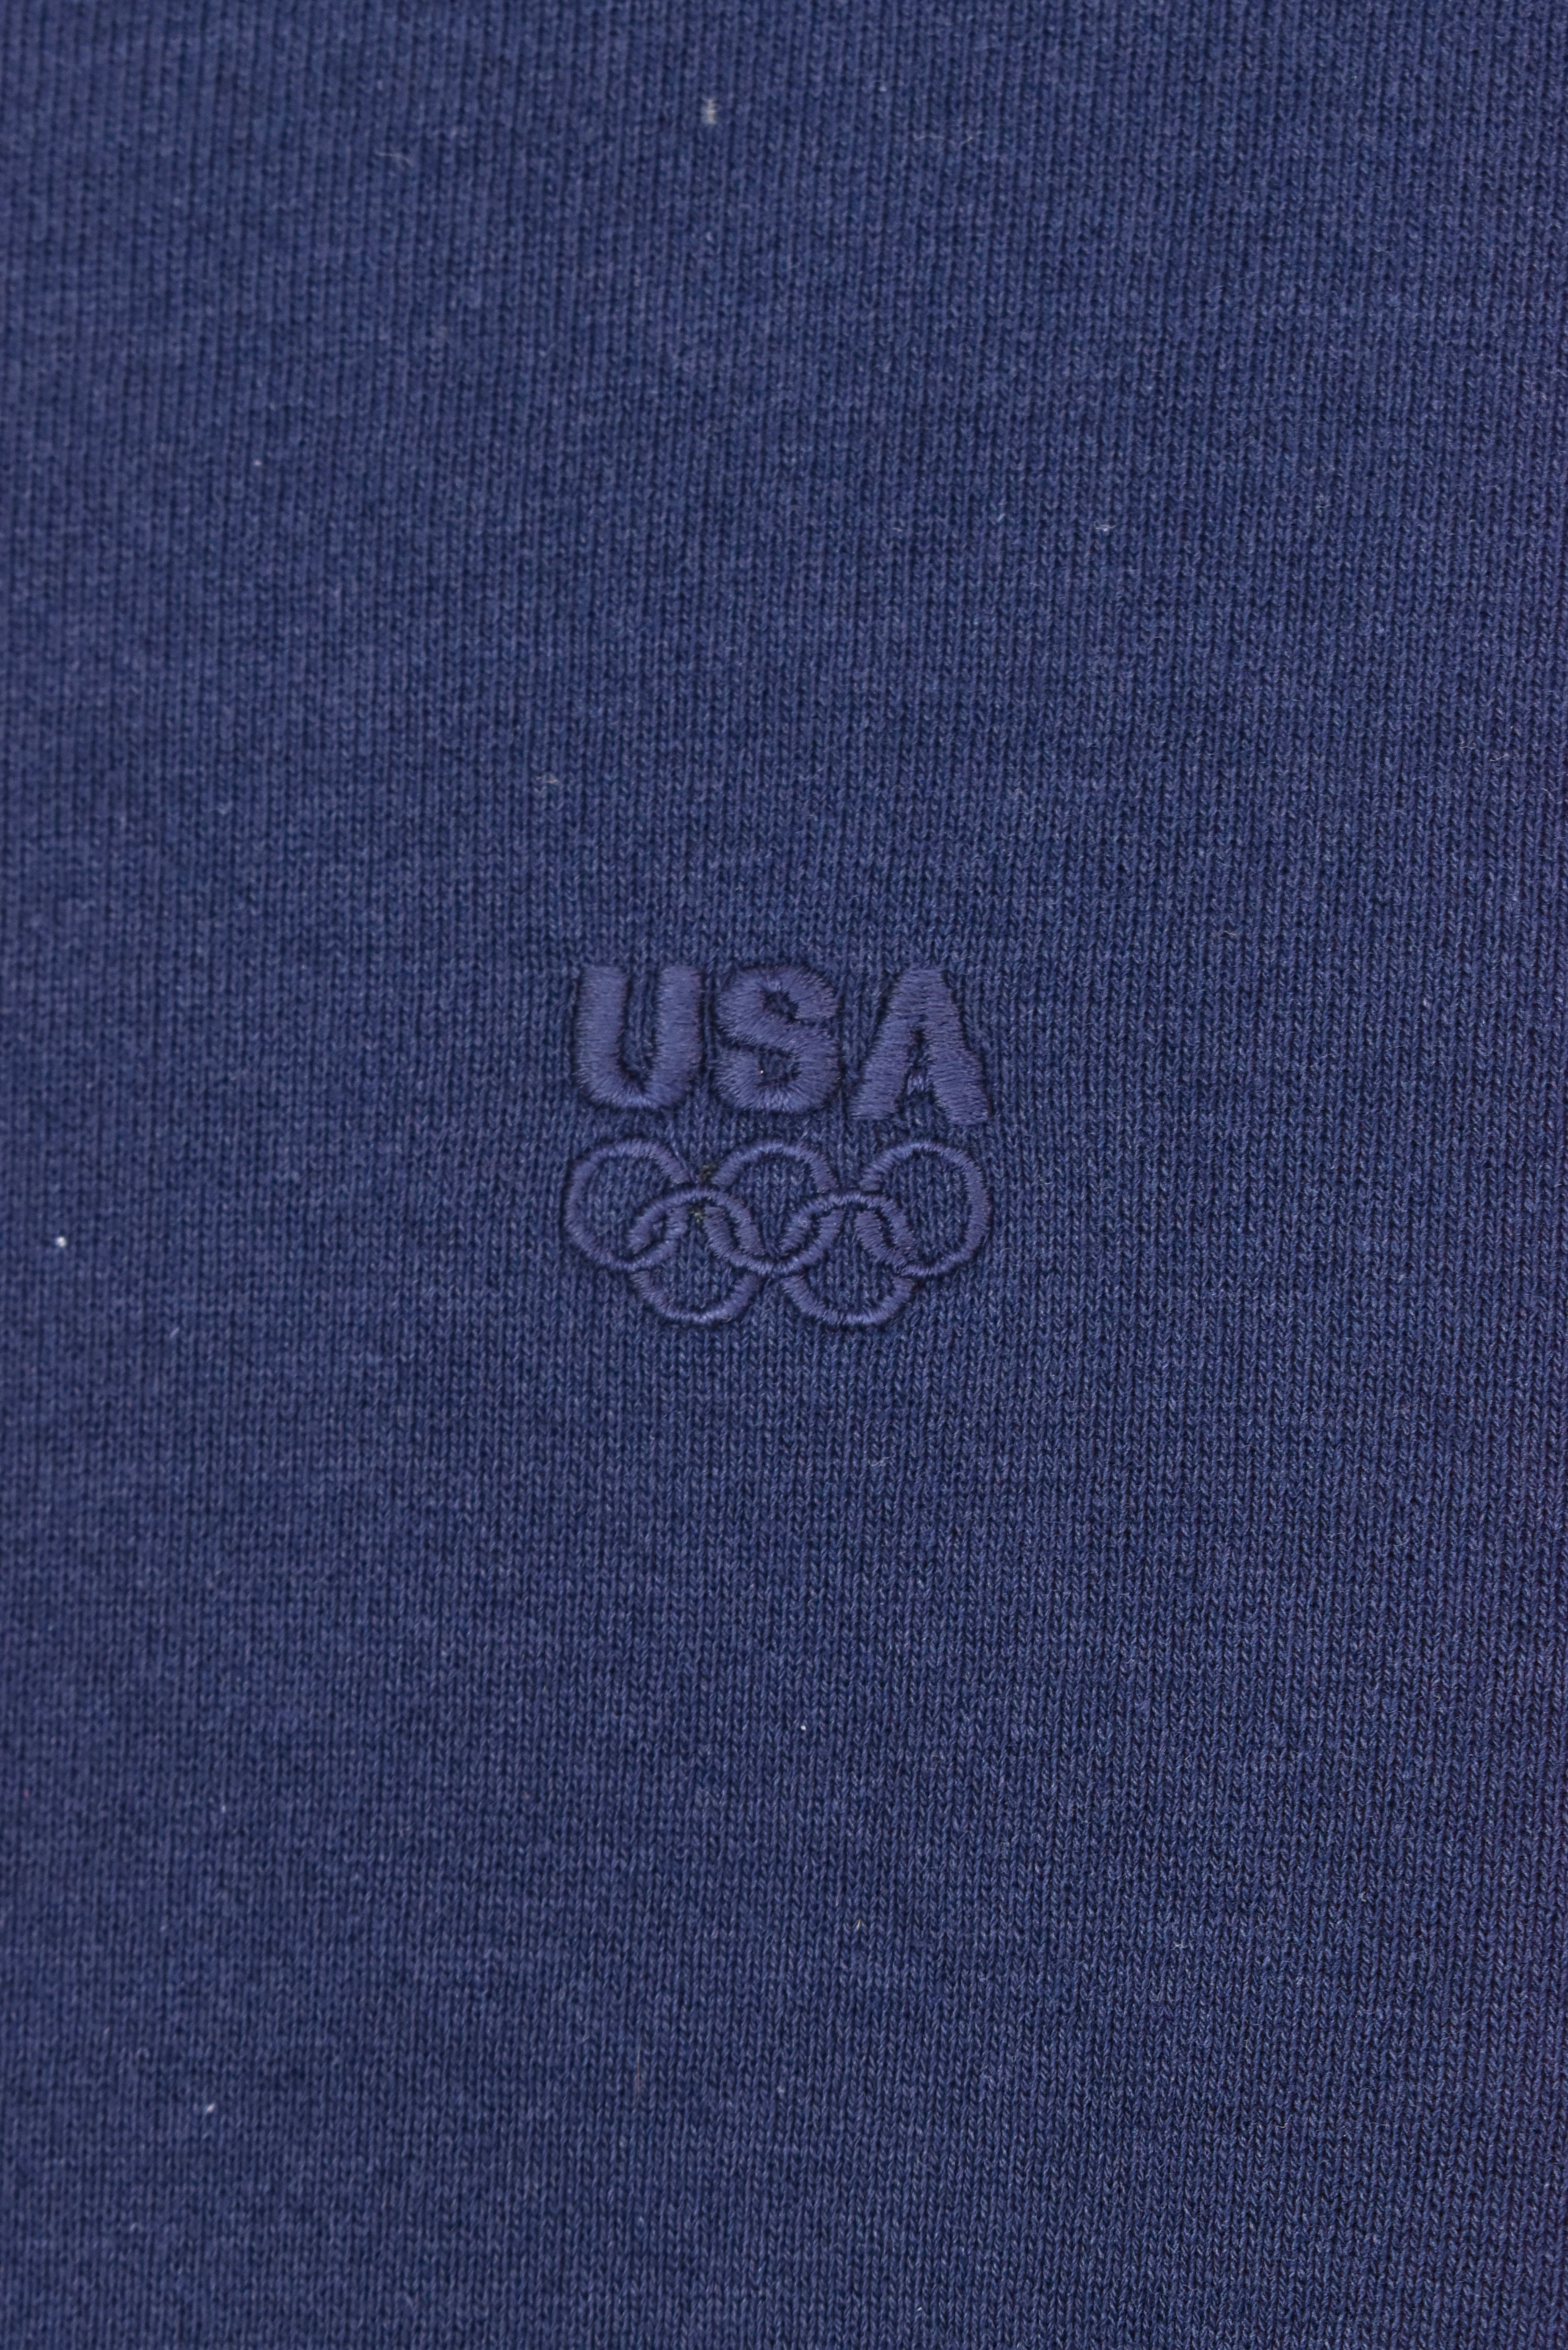 VINTAGE USA OLYMPIC TEAM EMBROIDERED NAVY SWEATSHIRT | XL OTHER